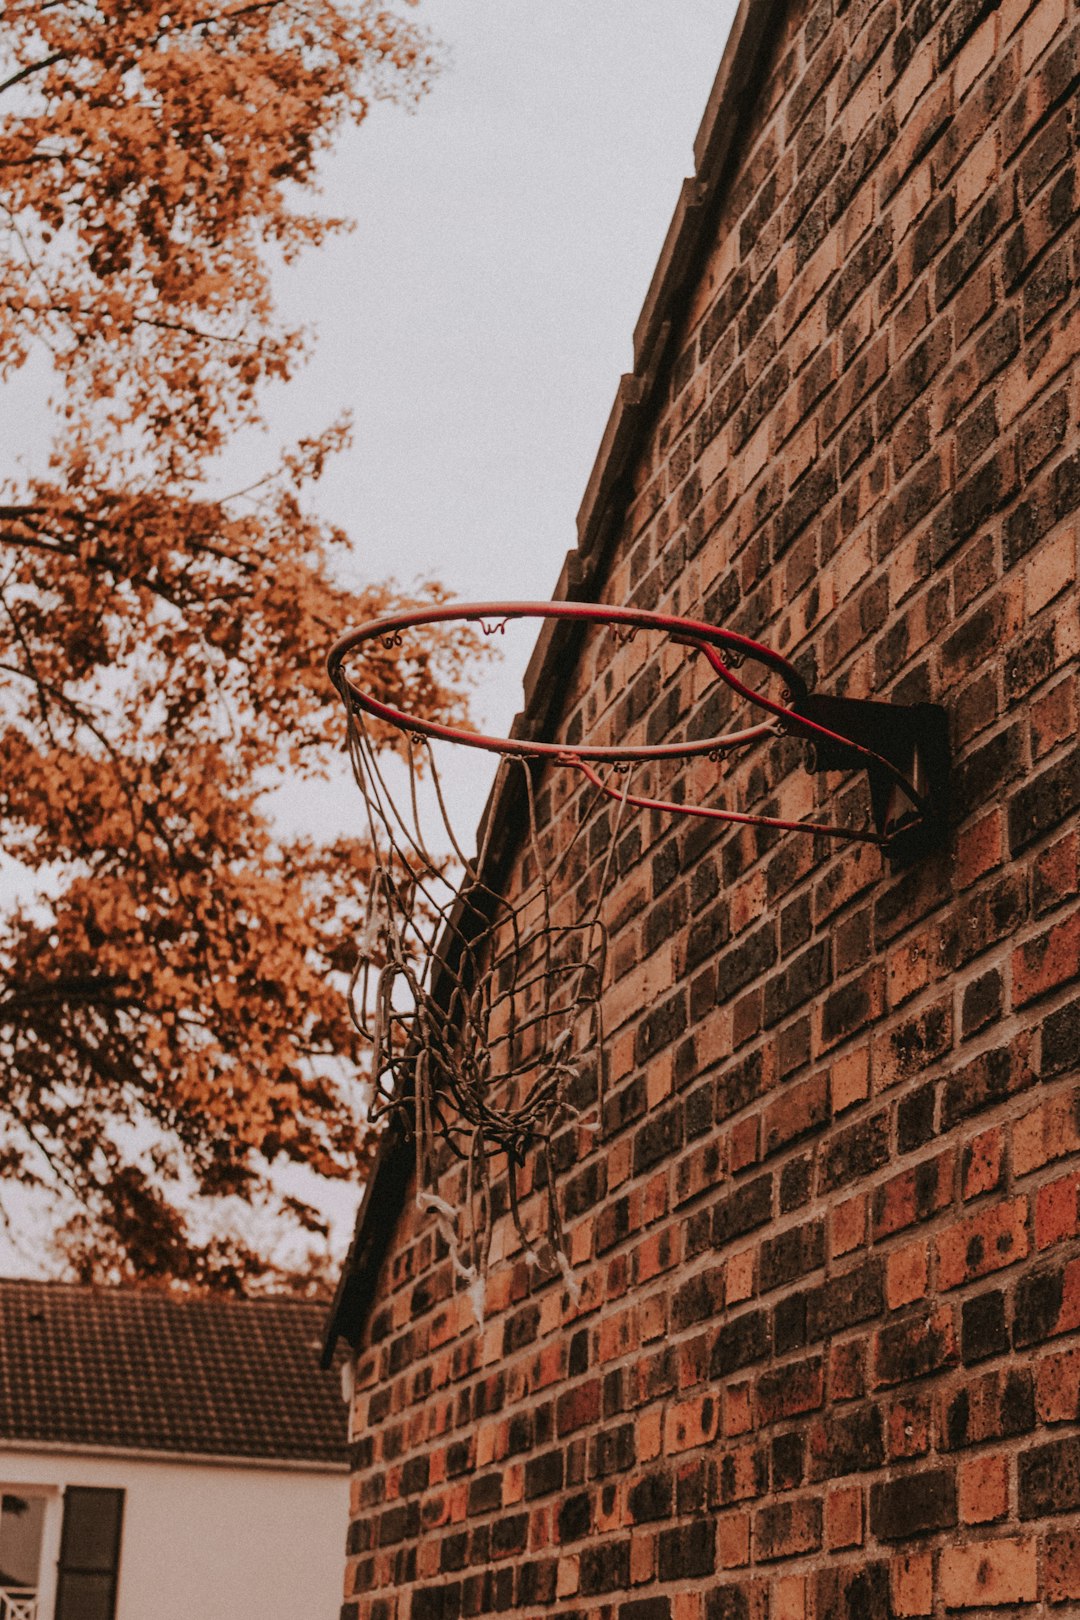 close-up photo of red basketball hoop mounted on brick wall